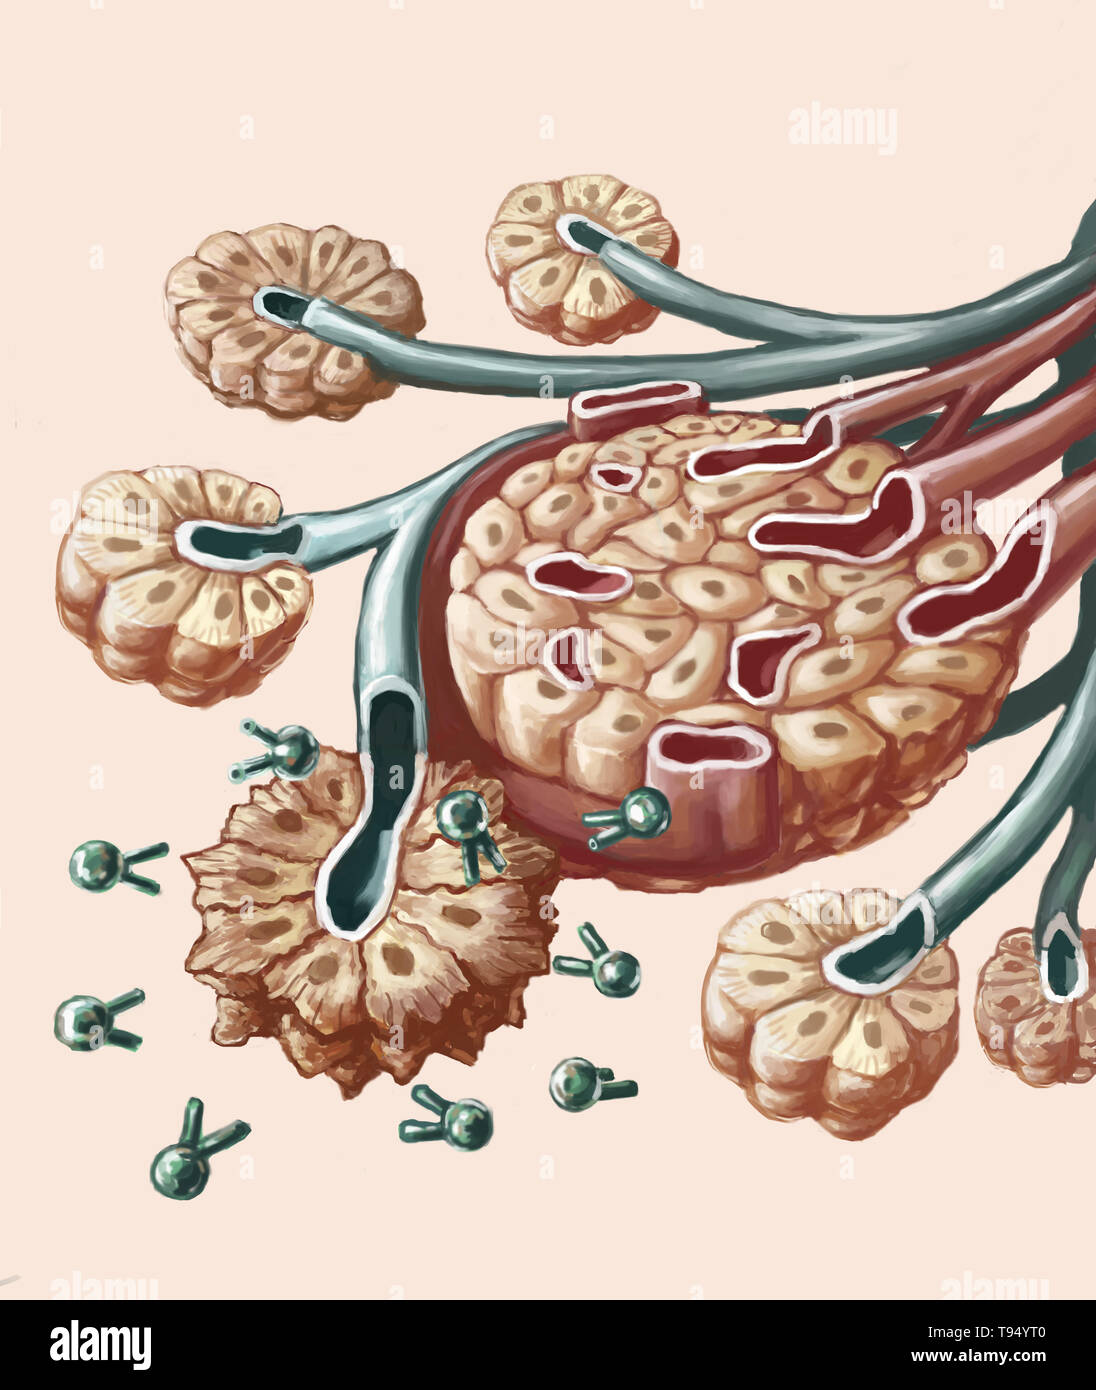 Illustration of radioimmunotherapy used to treat pancreatic cancer. A radioactive isotope (lead-212) is combined with a specific antibody capable of targeting cancerous cells. This combination of antibody and lead-212 radioisotope is injected intravenously into the body until it reaches the pancreas where it locks onto the cancerous cells' antigen. The lead destroys the cells by irradiating them. This treatment limits the toxicity on healthy cells located near the cancerous cells. Stock Photo